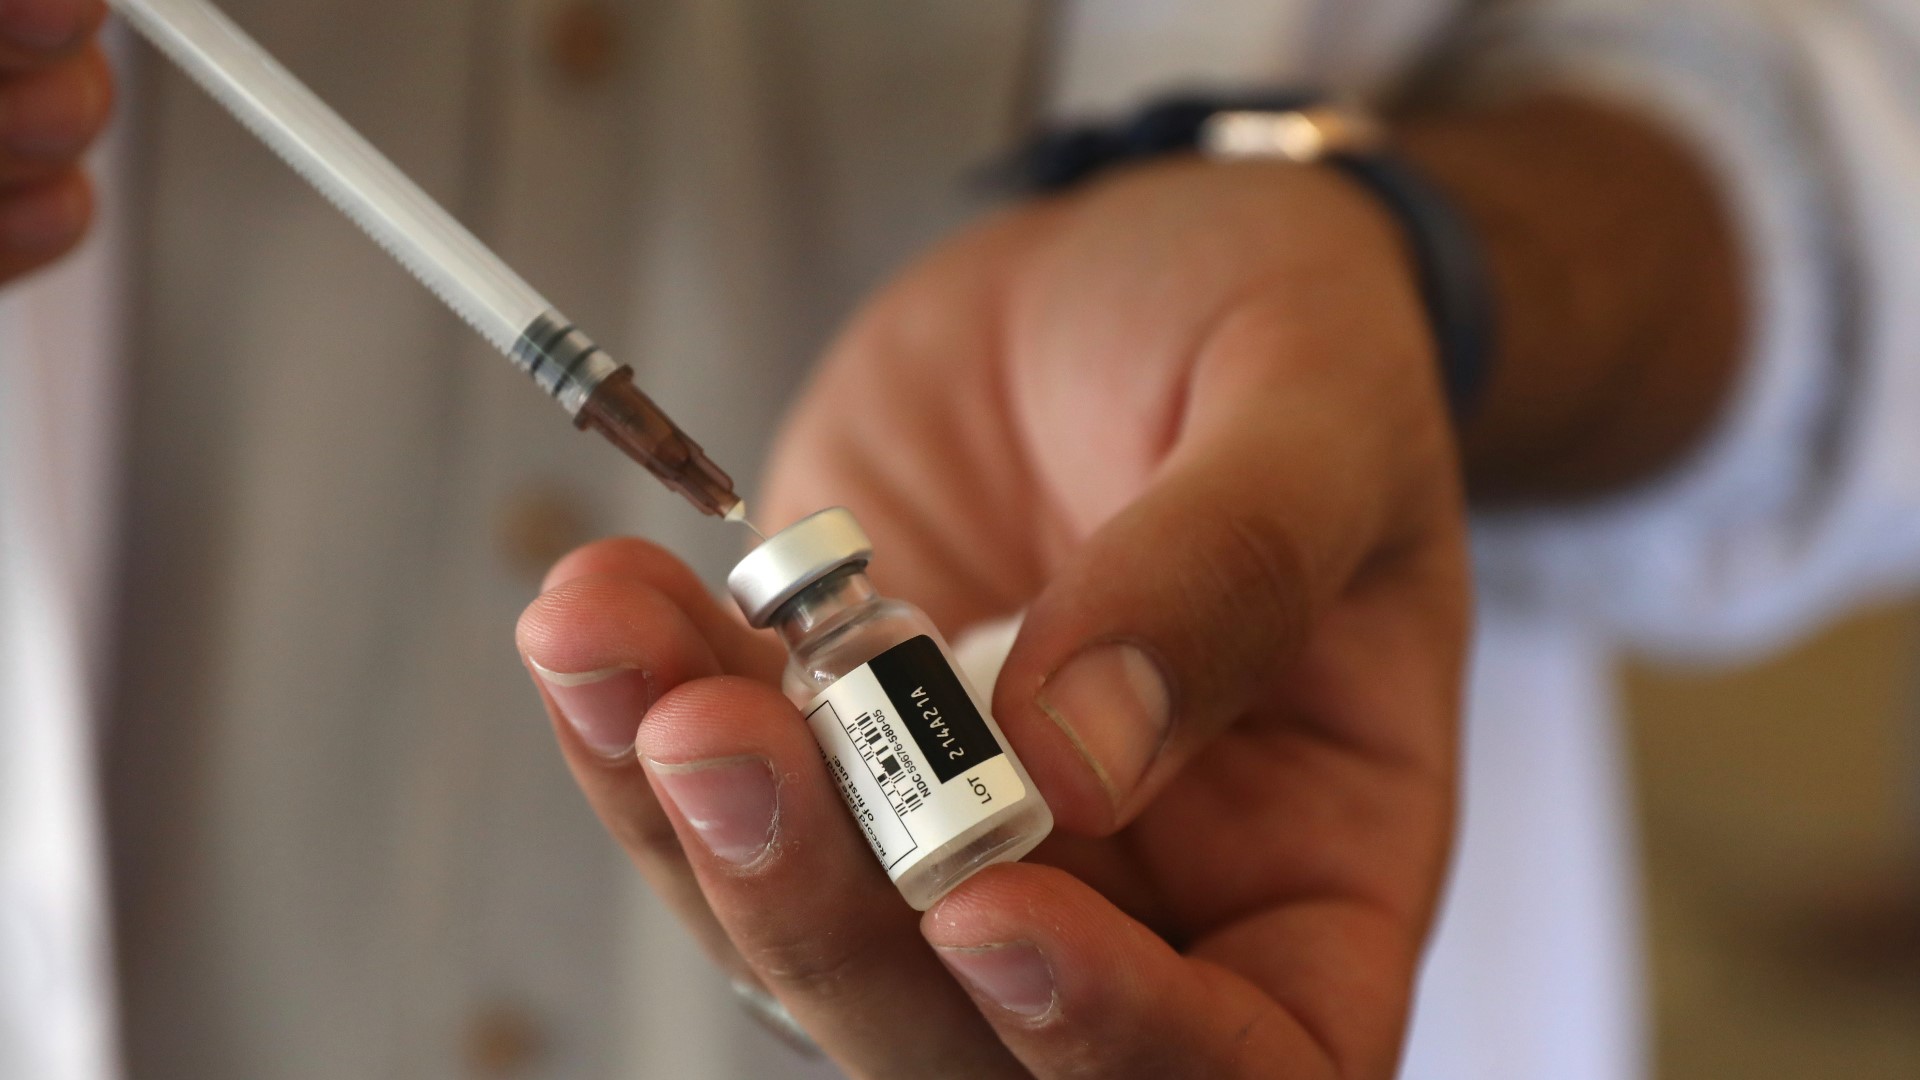 Since Monday, more than 40,000 Ohioans have received a booster shot, compared to just 15,000 who have gotten the first dose of a COVID-19 vaccine.